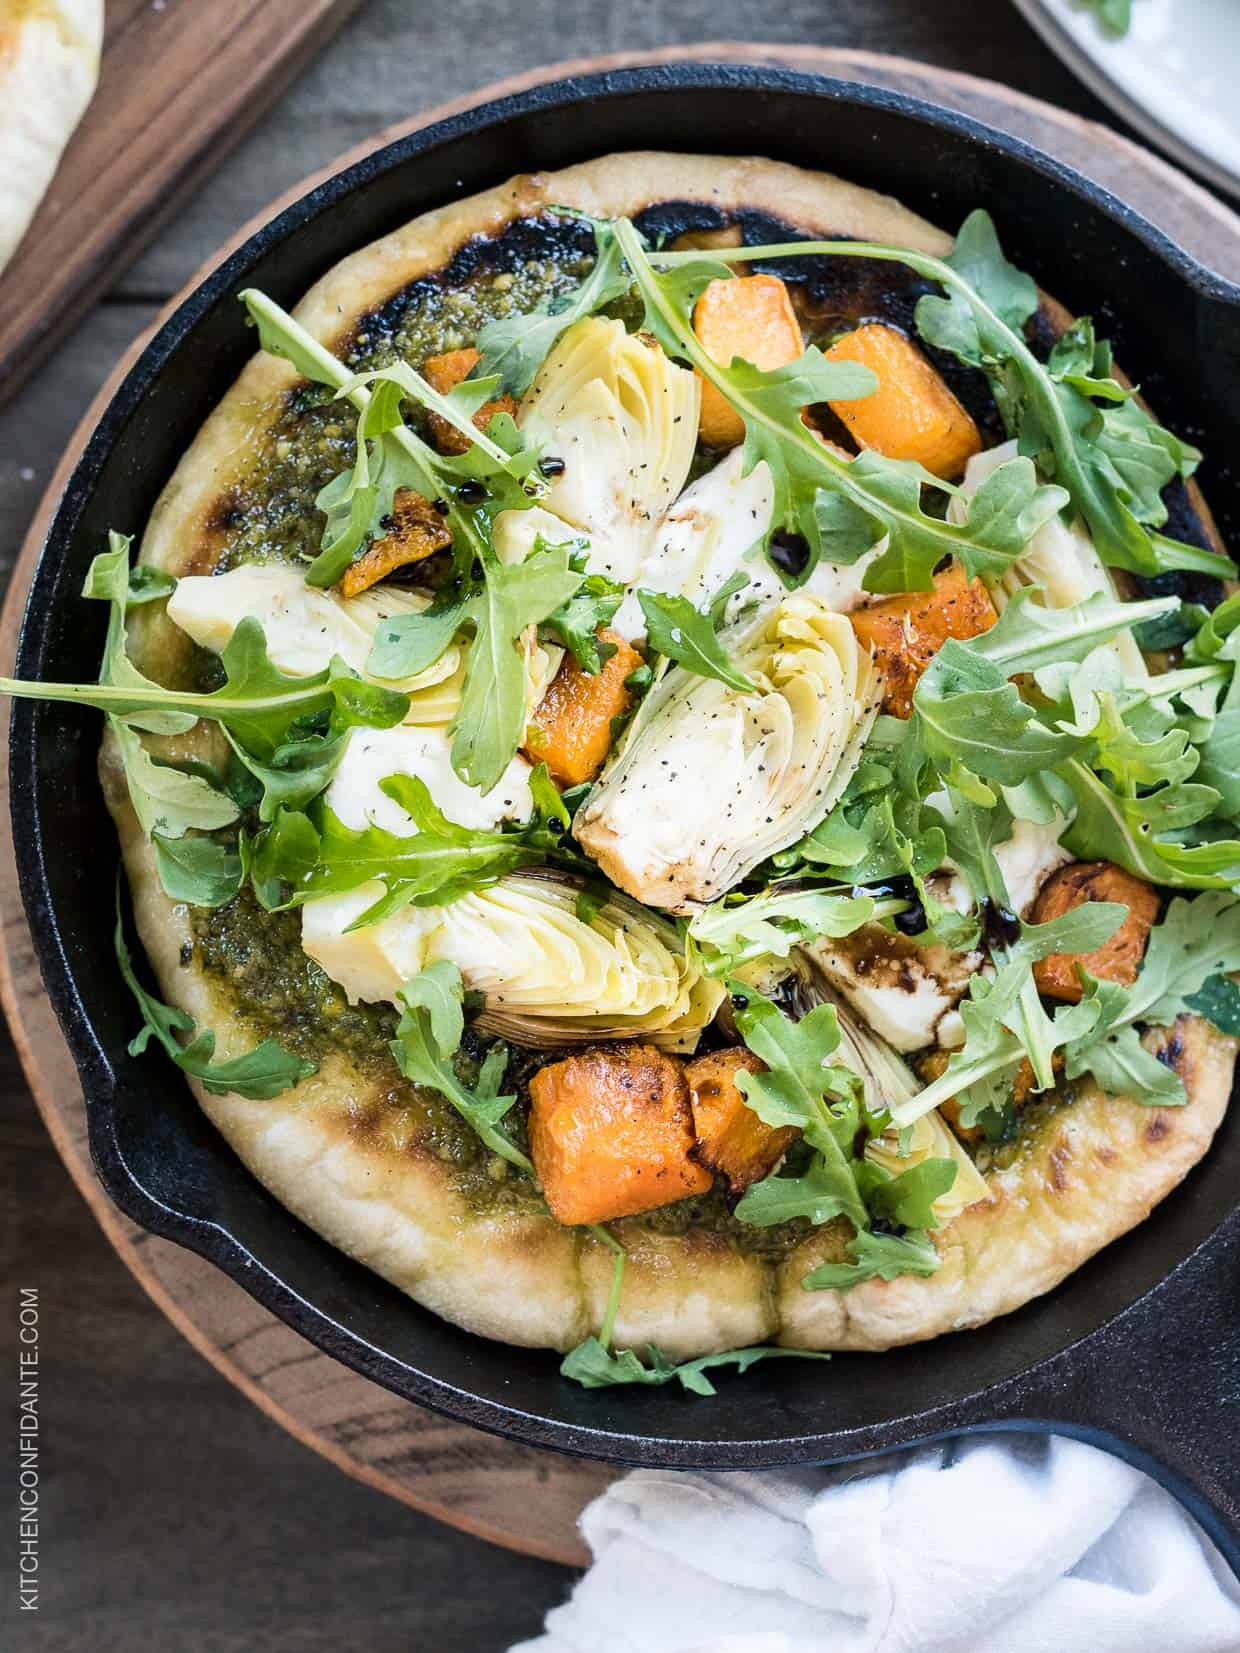 Cast iron skillet filled with Skillet Pesto Flatbread with Goat Cheese, Artichokes and Roasted Butternut Squash.